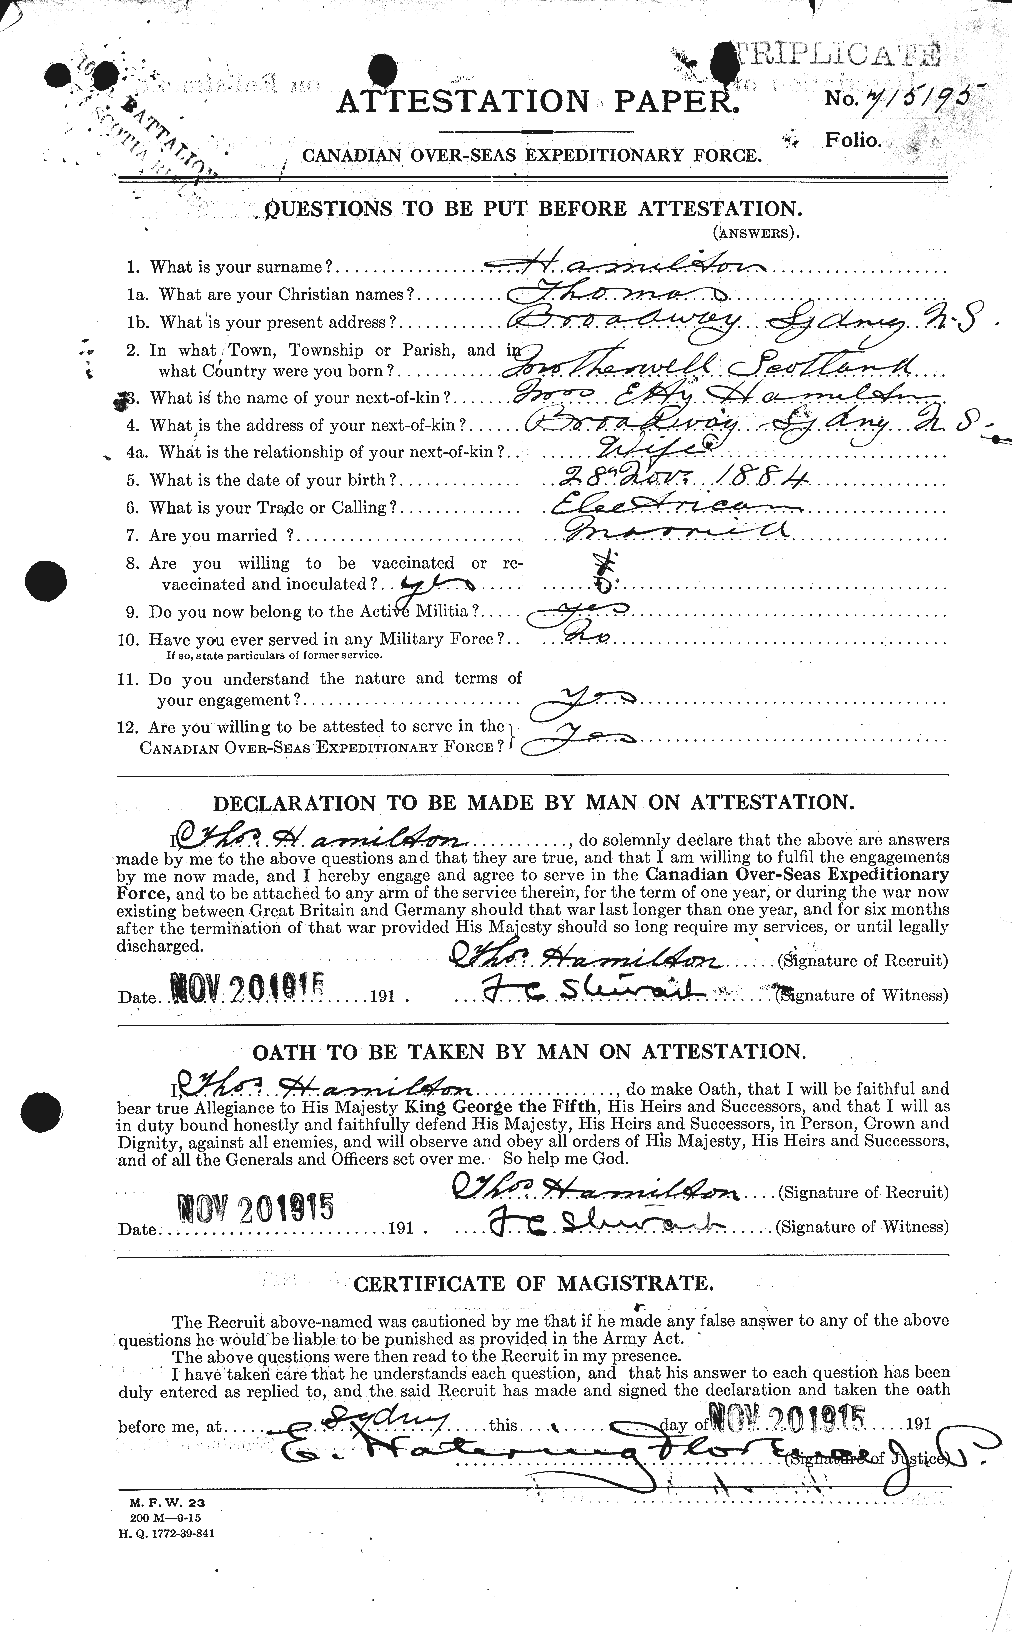 Personnel Records of the First World War - CEF 374789a